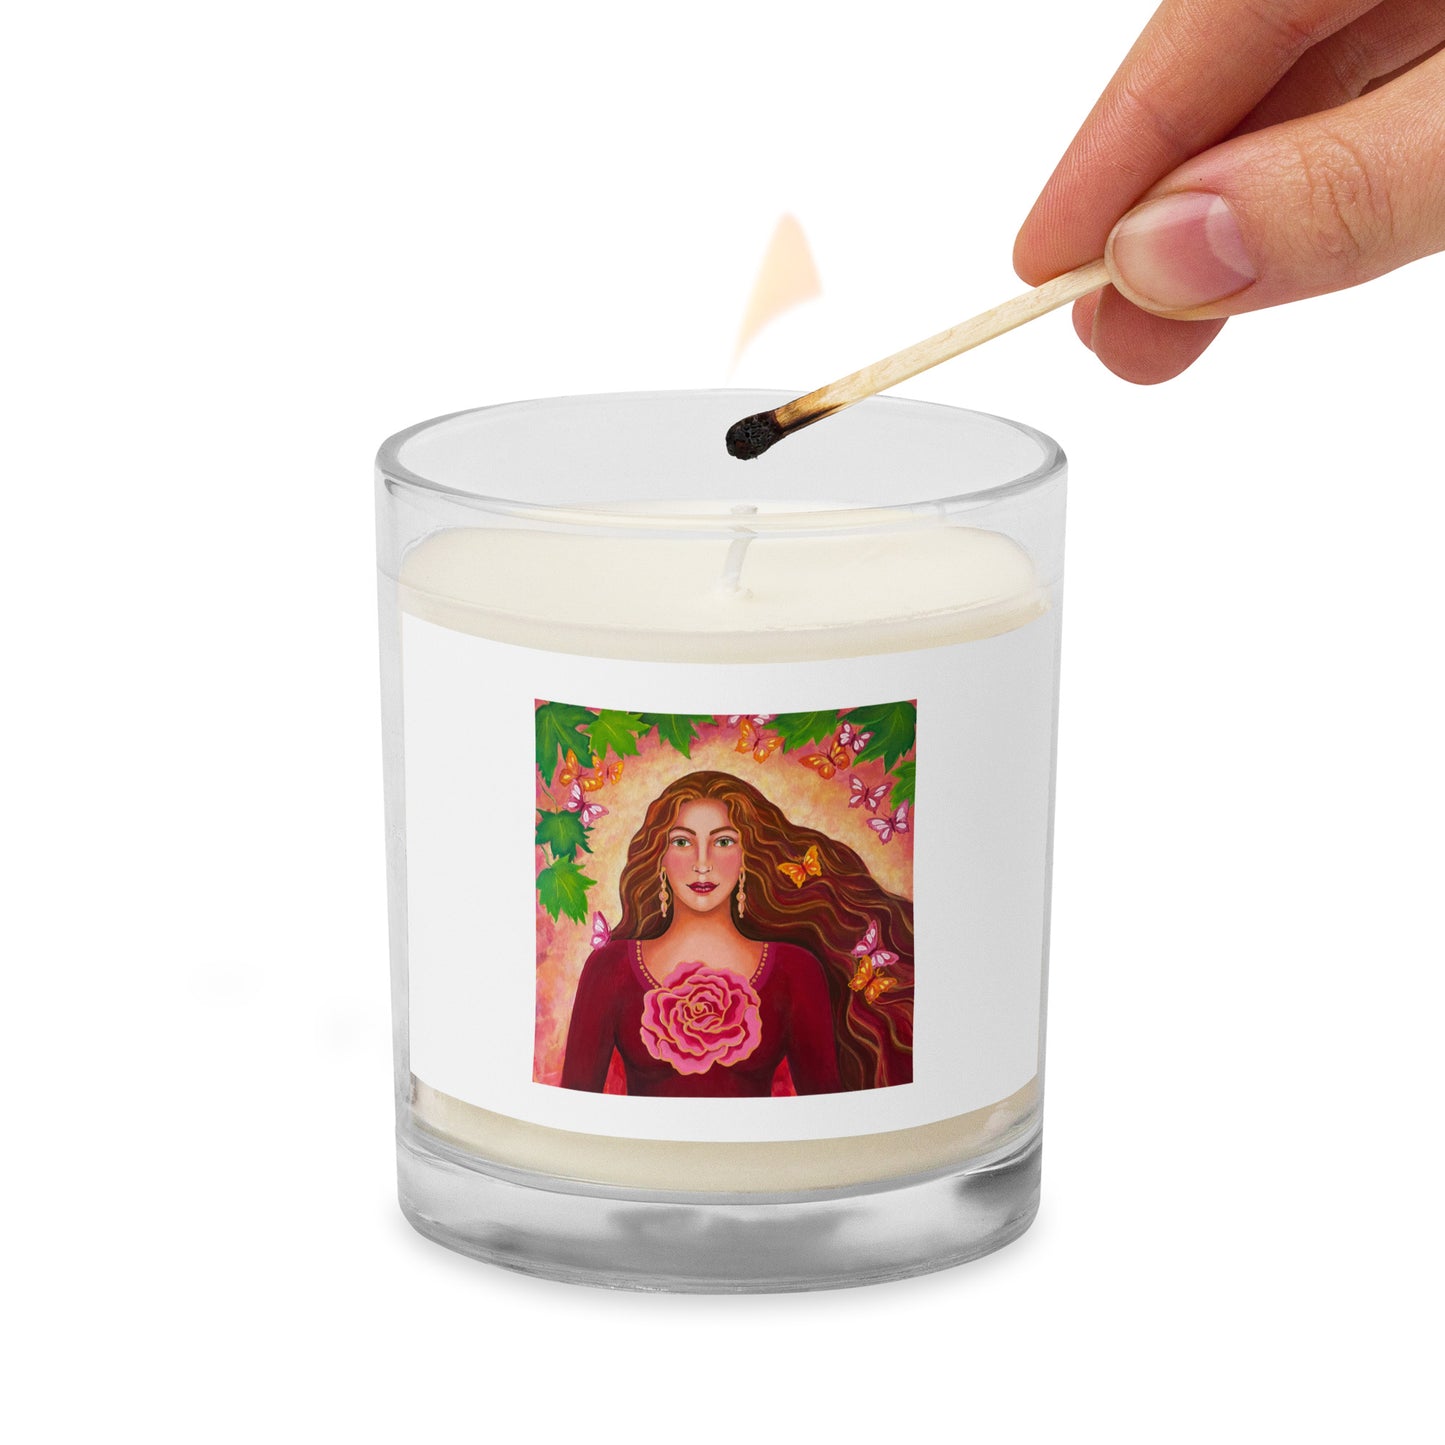 Magdalene's Rose Glass Jar Soy Wax Candle